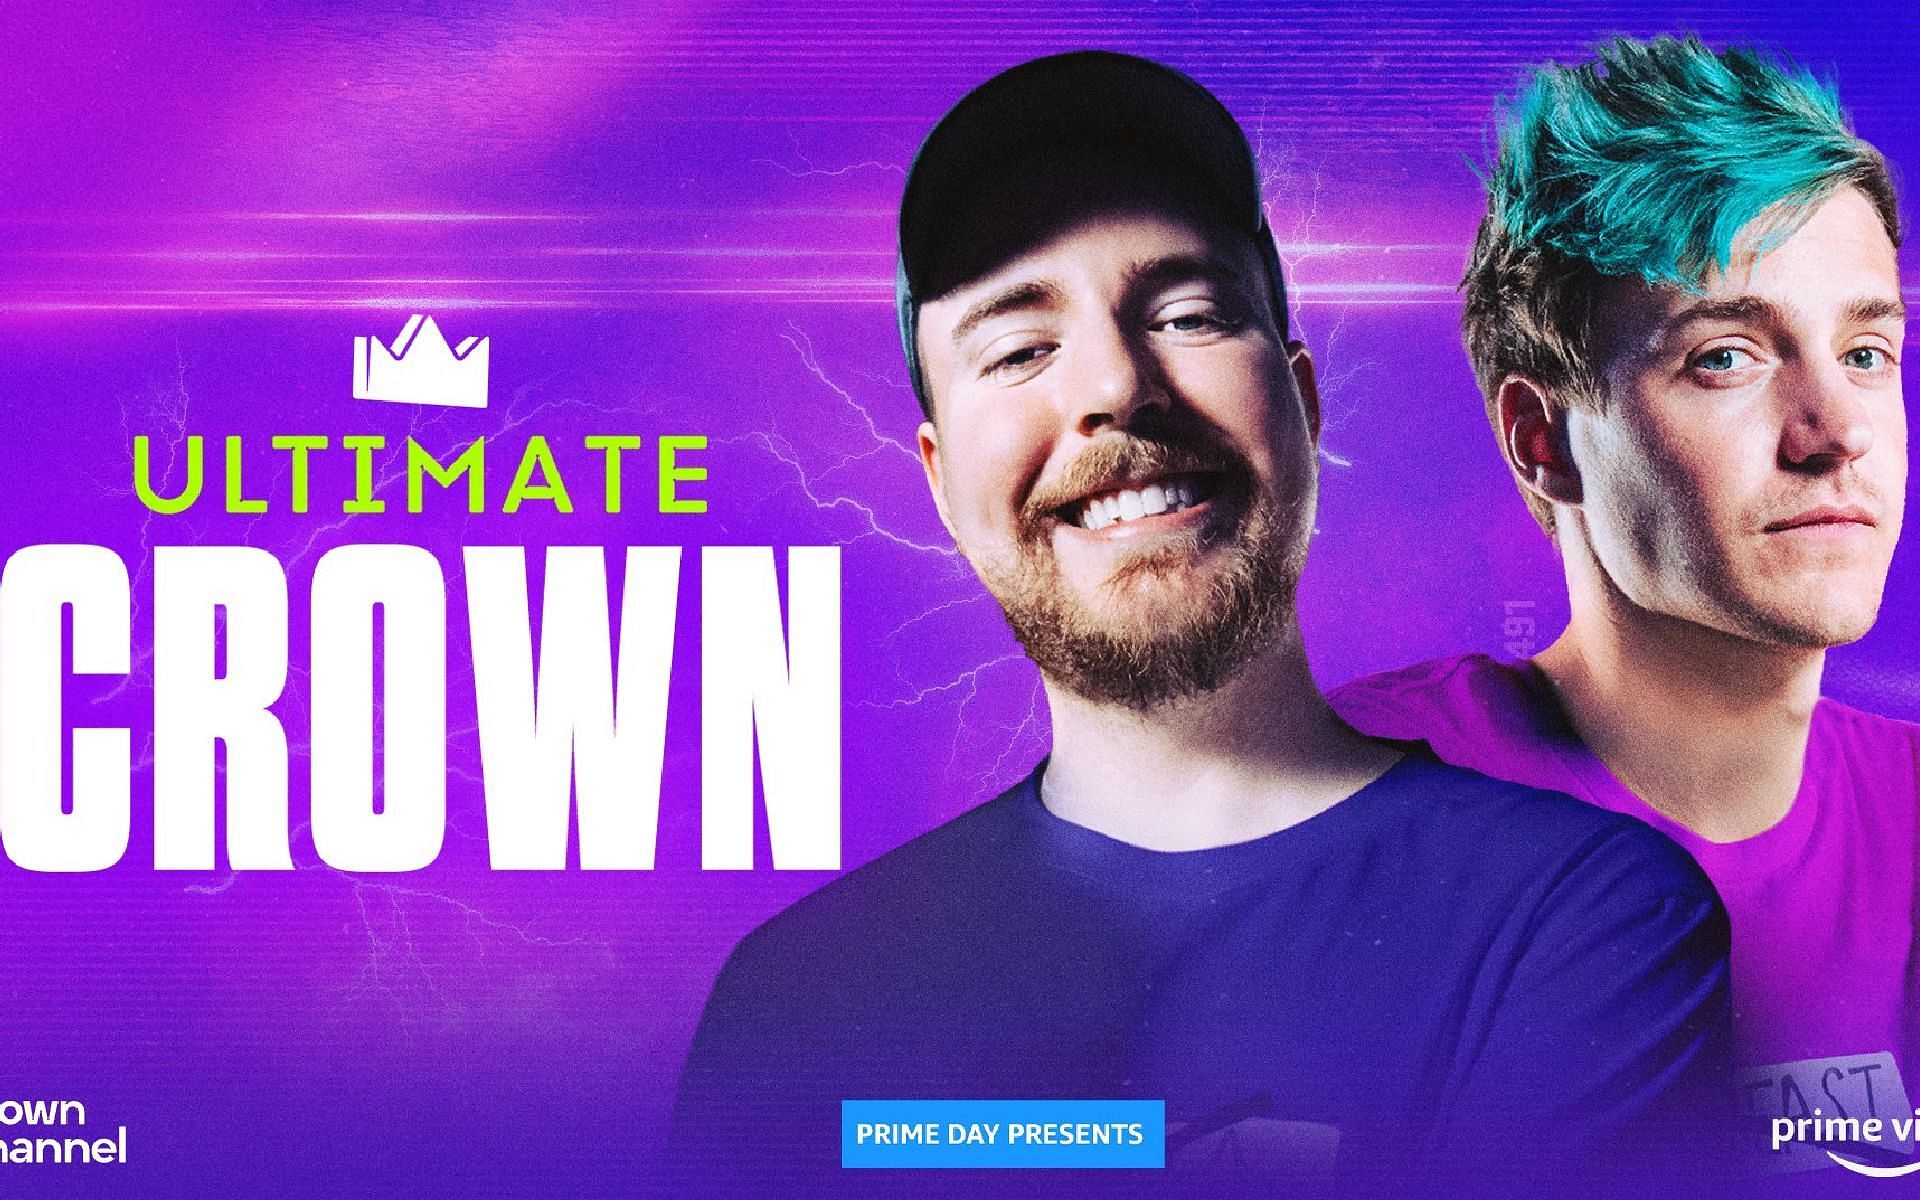 MrBeast dominated the League of Legends tournament and won $150,000 (Image via Crown Channel/Twitter)